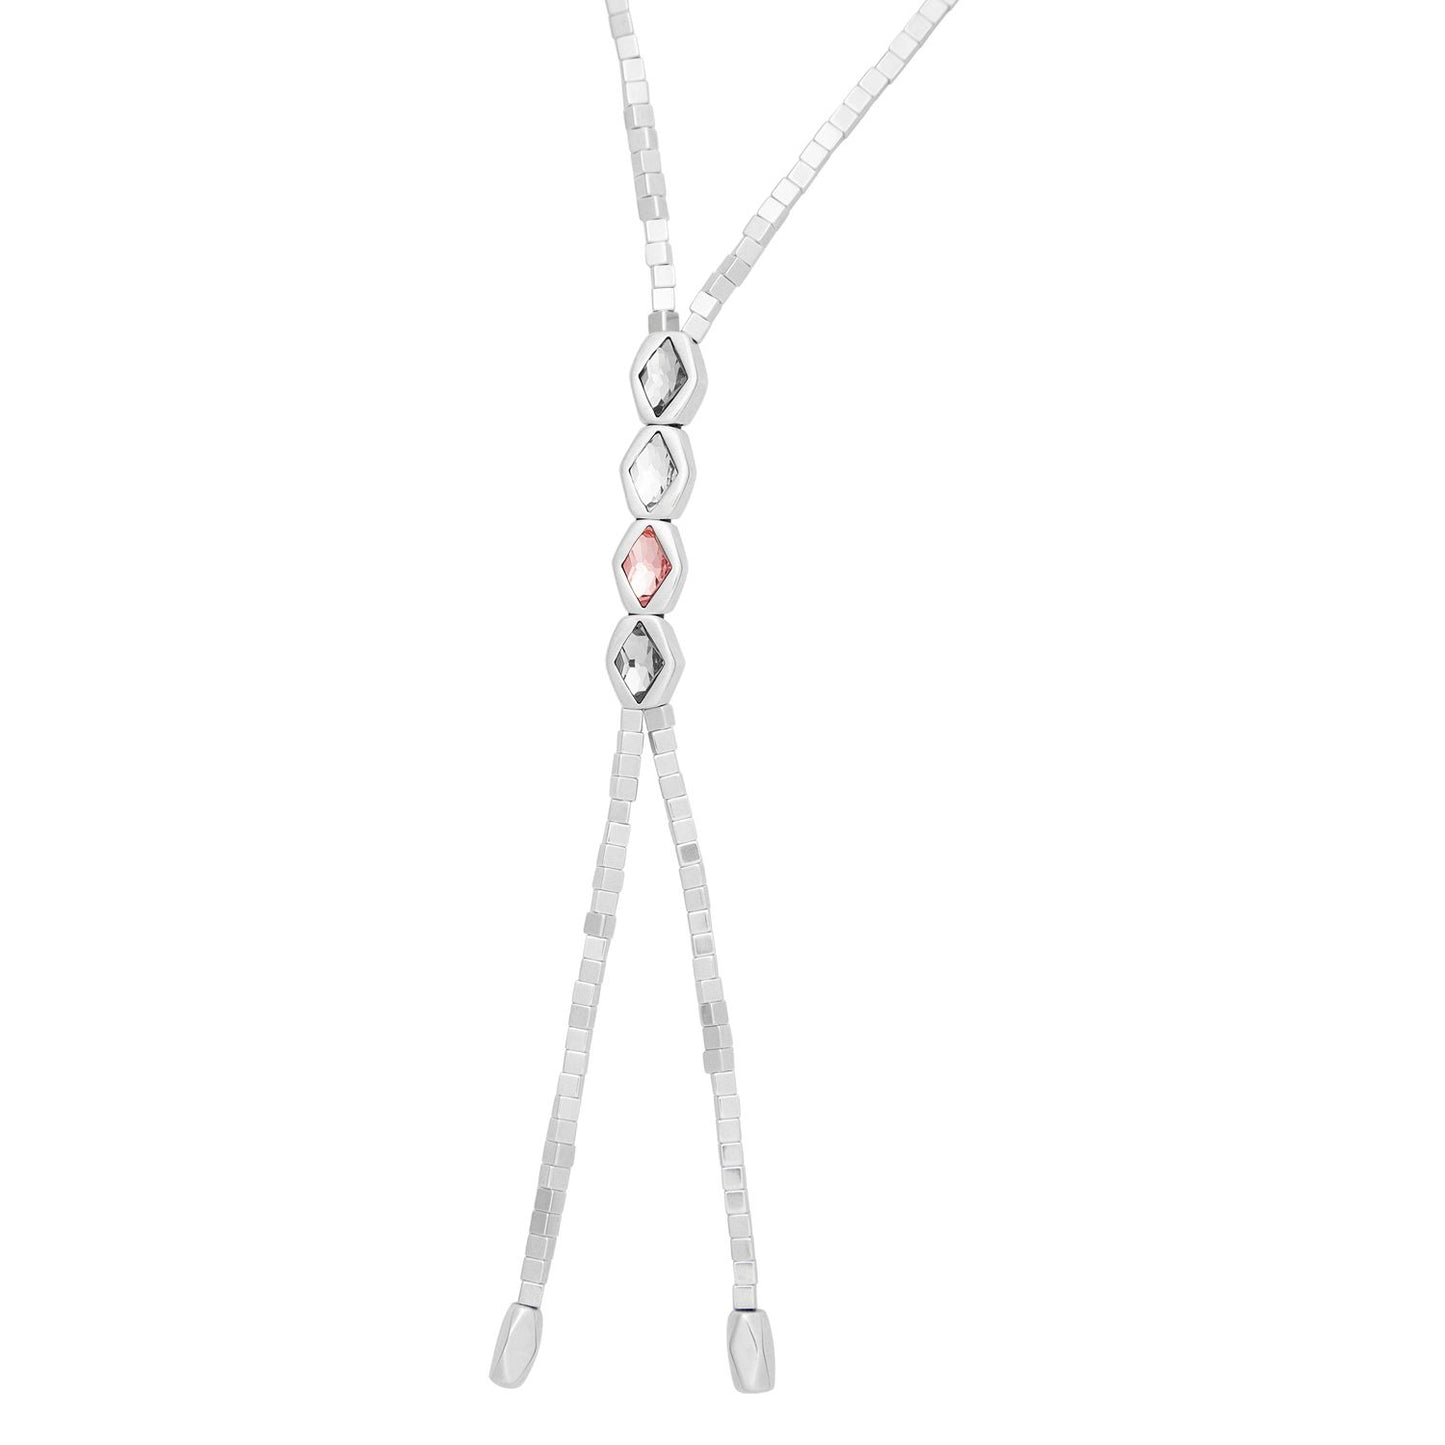 Superstition Necklace w/ White, Gray and Pink Crystals From The Dazzle Collection